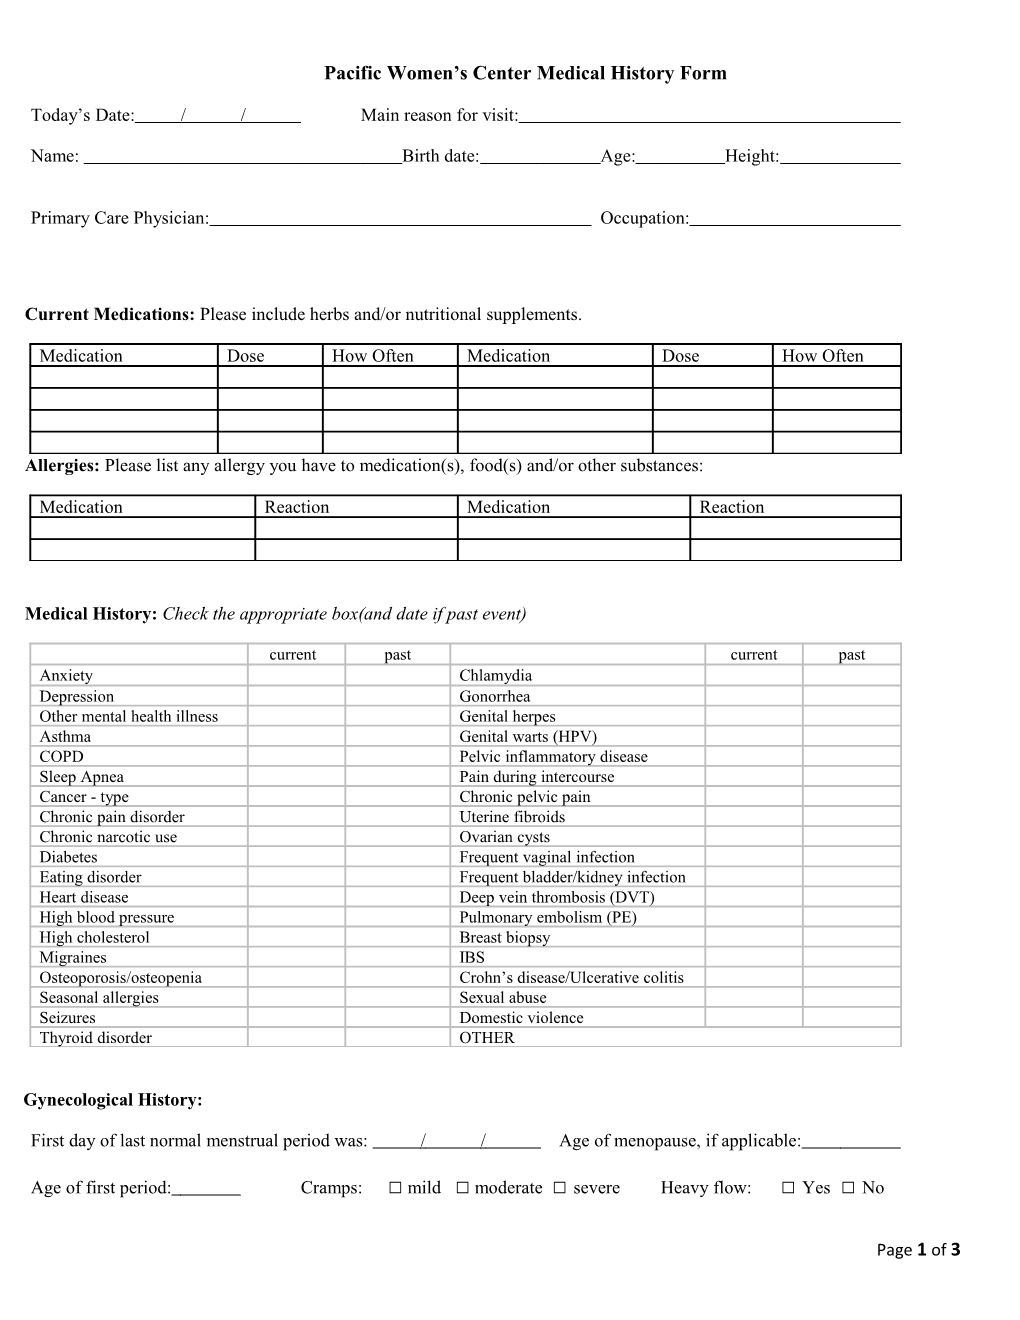 Pacific Women S Centermedical History Form